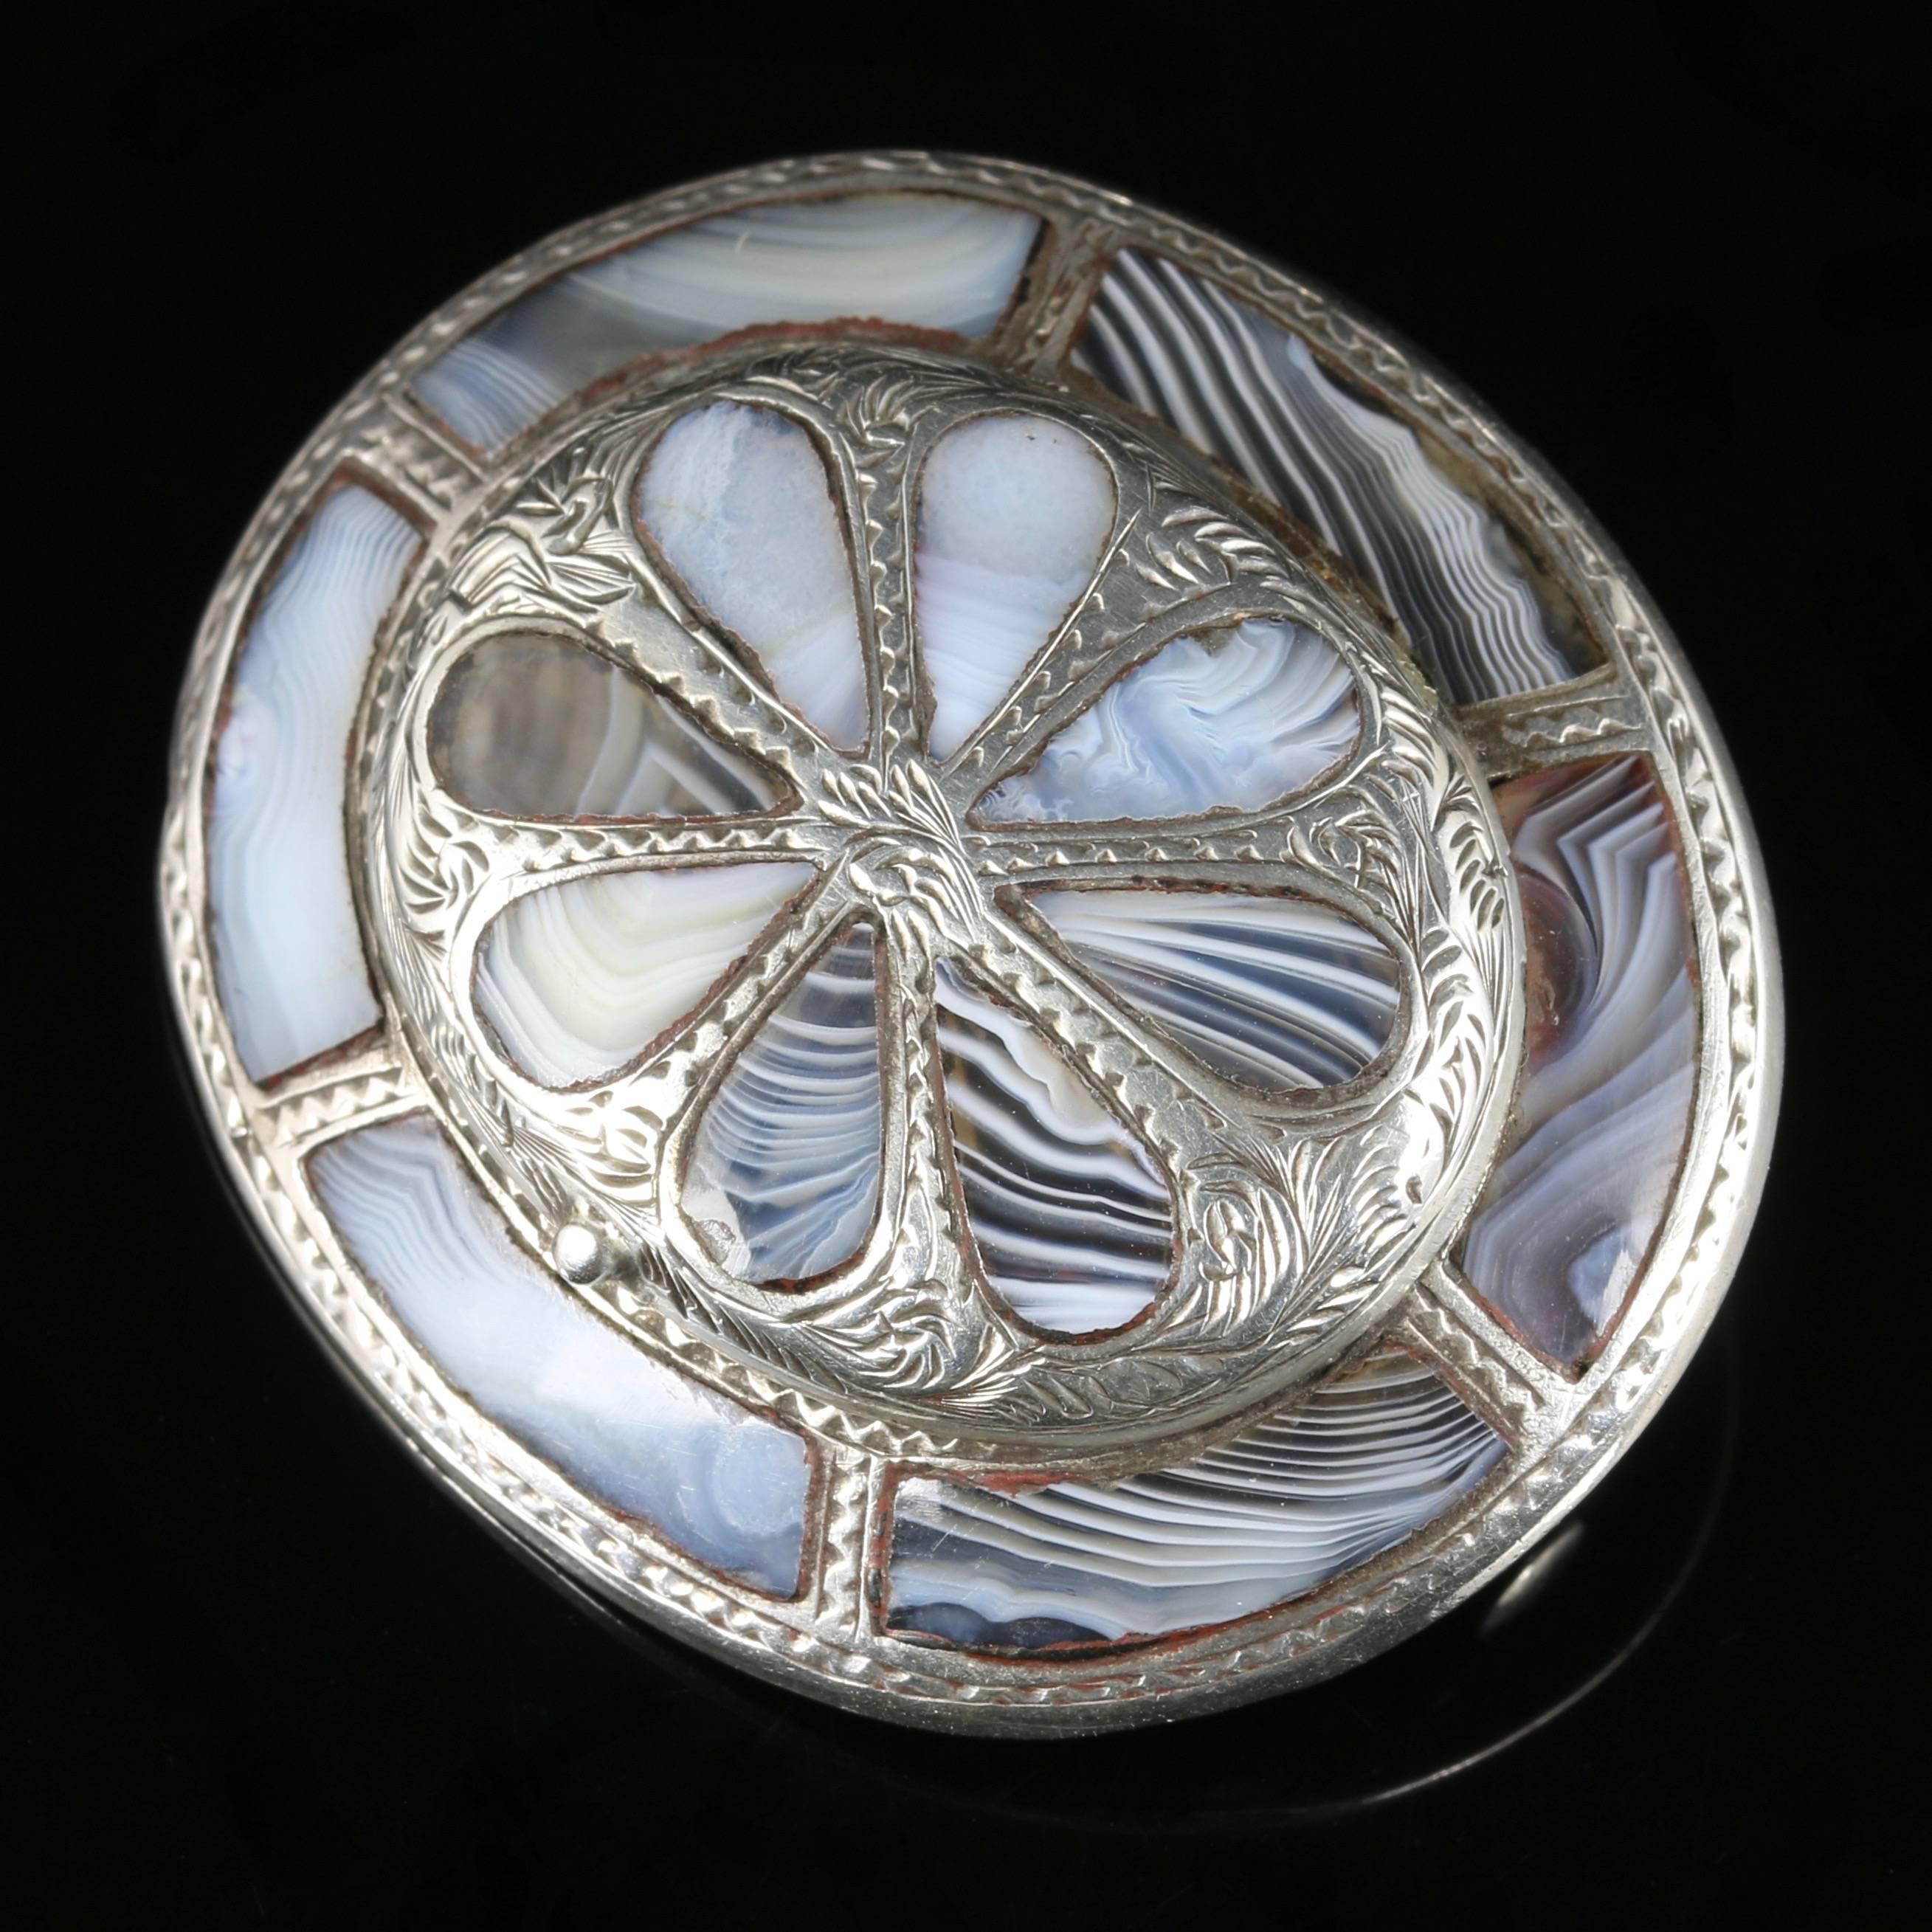 This fabulous Victorian Sterling Silver Scottish Agate brooch is exquisite. Circa 1860

Set with a lovely locket on the top which opens to display a glass window where you can add your own history.

A superb quality brooch that is very well